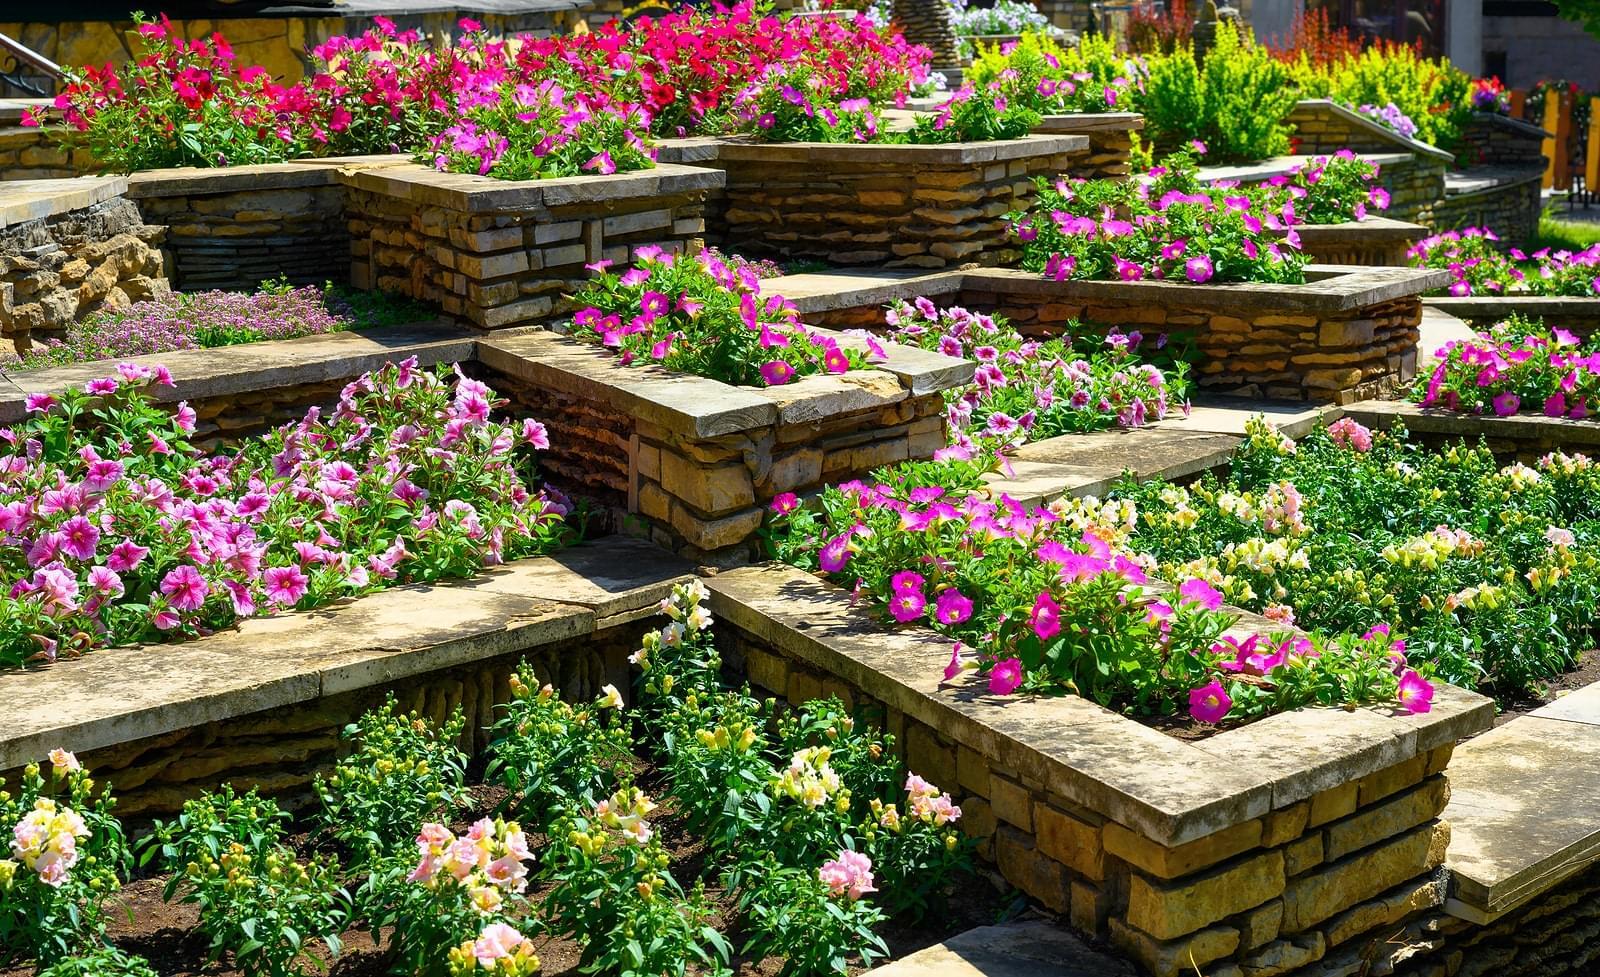 Landscaping with stone retaining walls and many colorful flowers